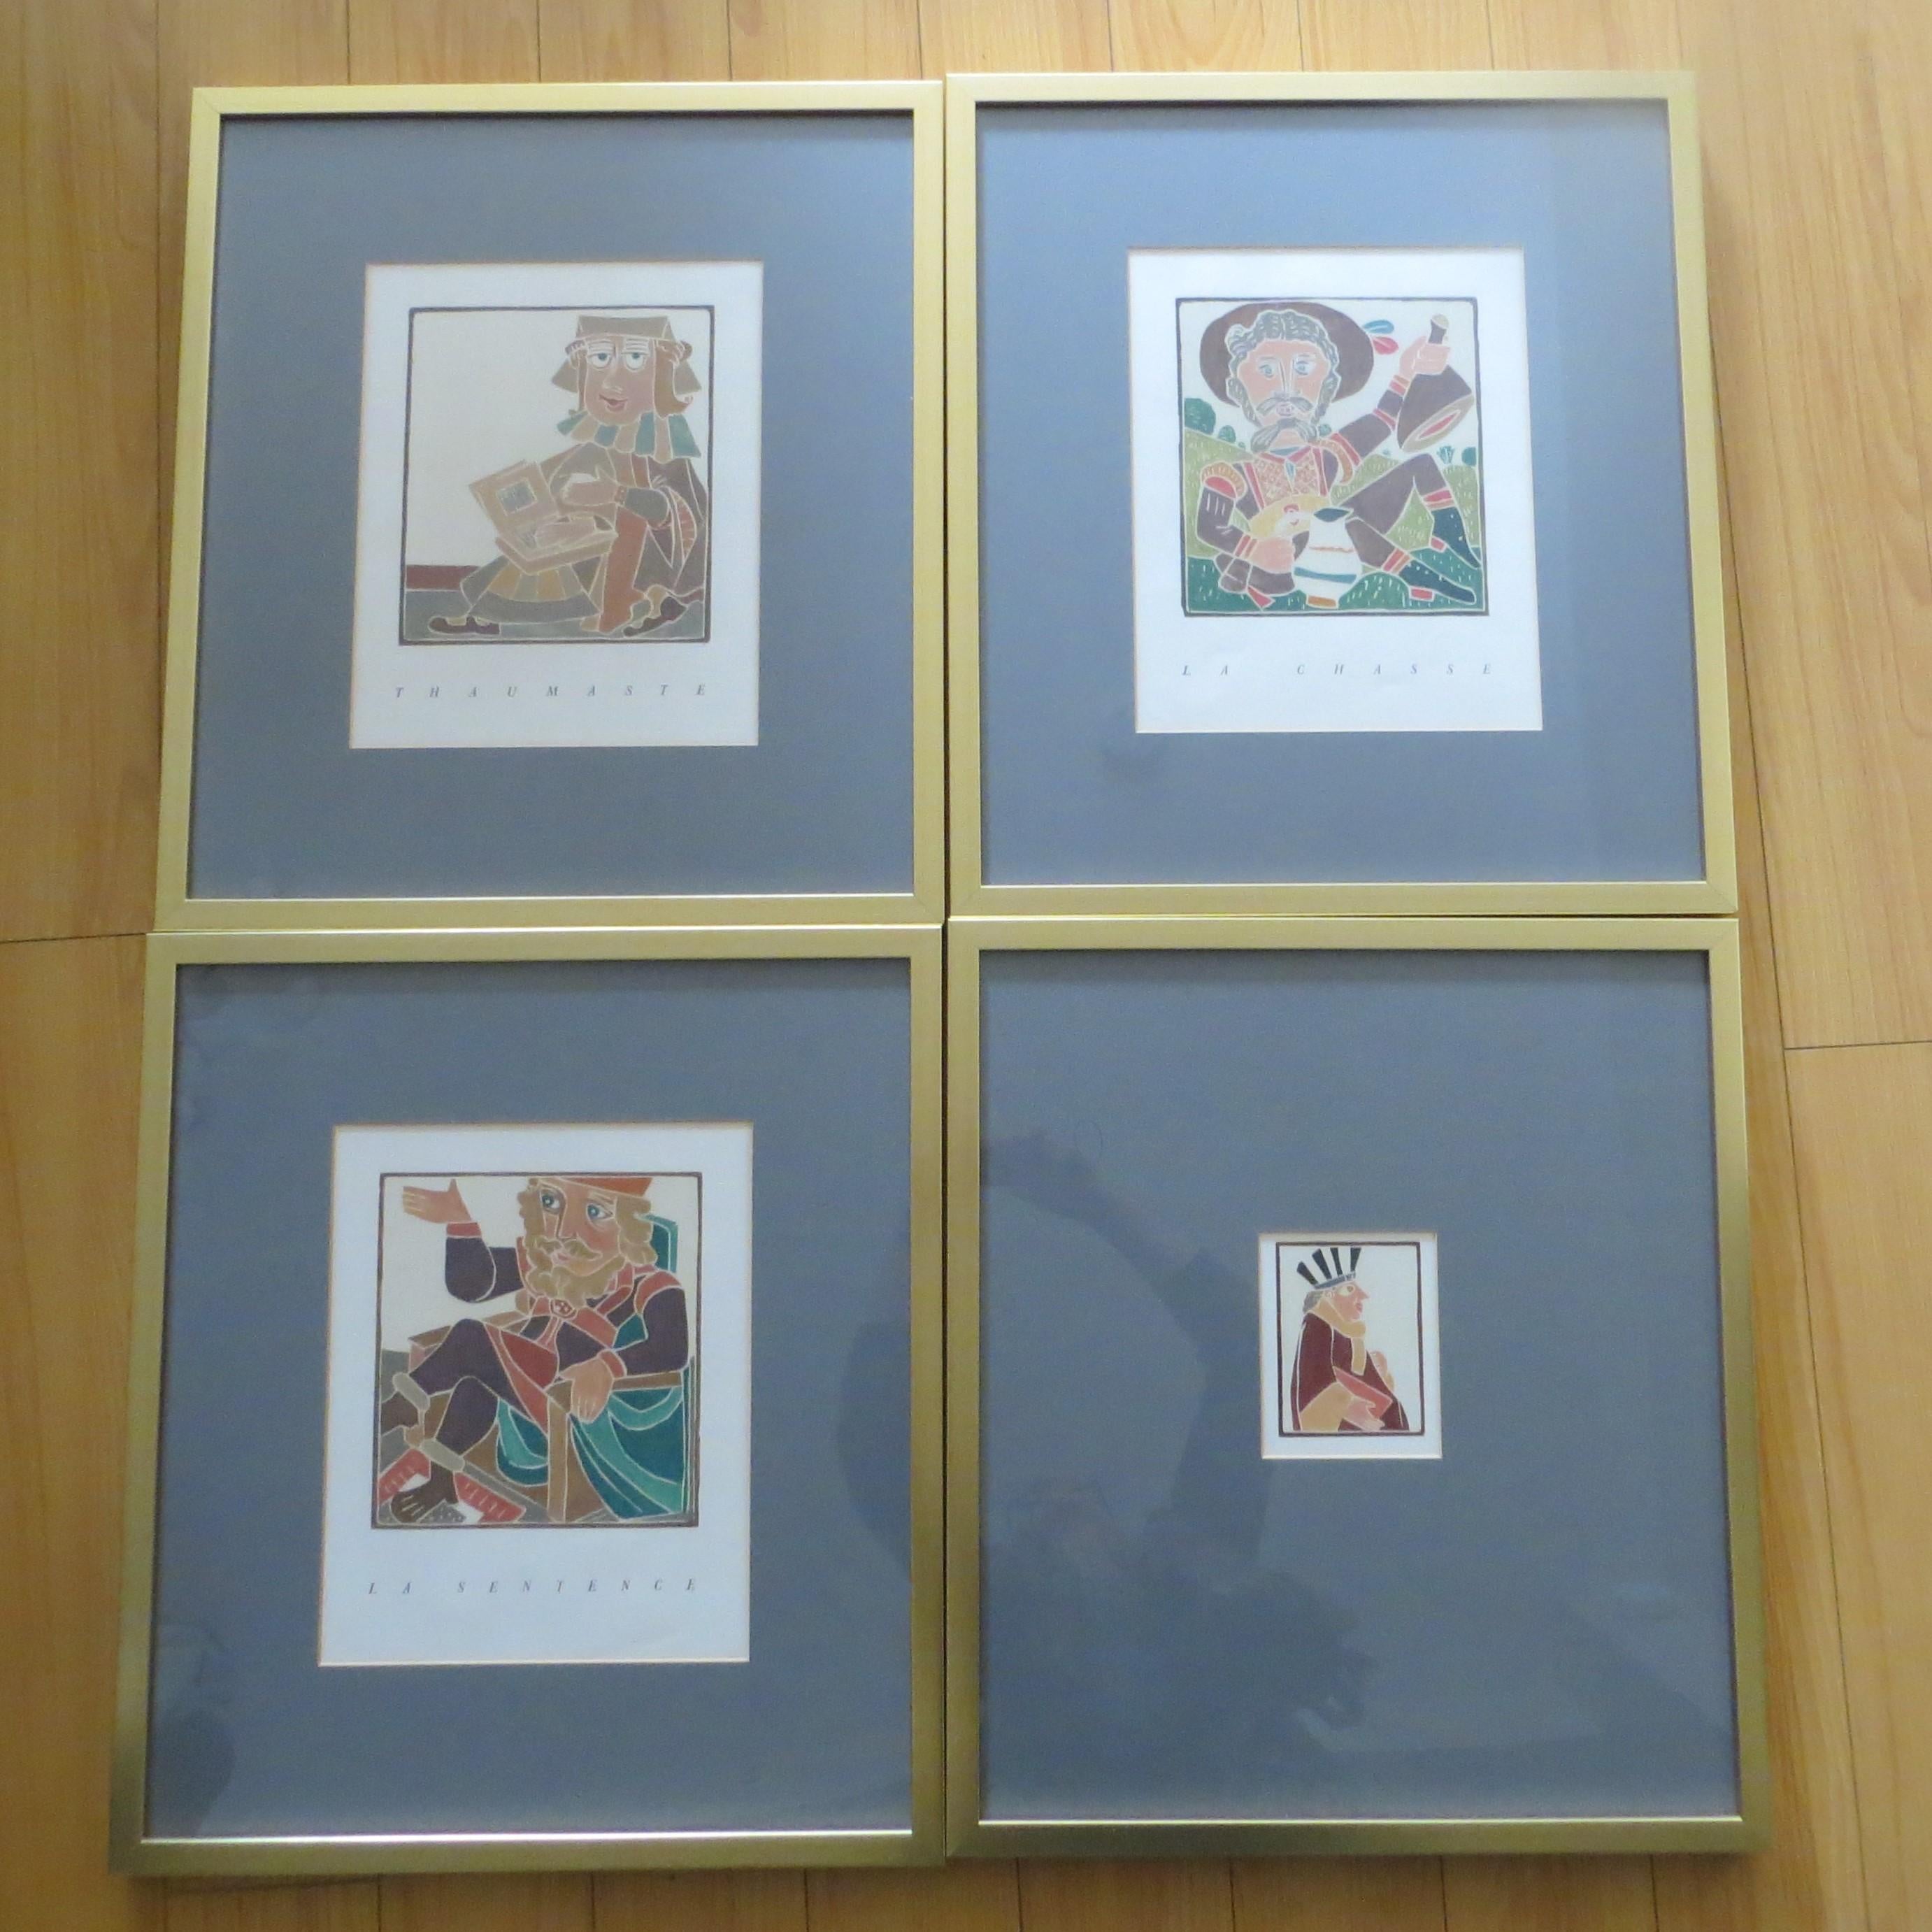 
Rare Set of Four Original Color WDCT Skira 1943 after RABELAIS (François). 
The Horrible and Terrible Deeds and Prowess of the Renowned Pantagruel, King of the Dipsodes, Son of the Great Giant Gargantua. Woodcuts in colors drawn and engraved by